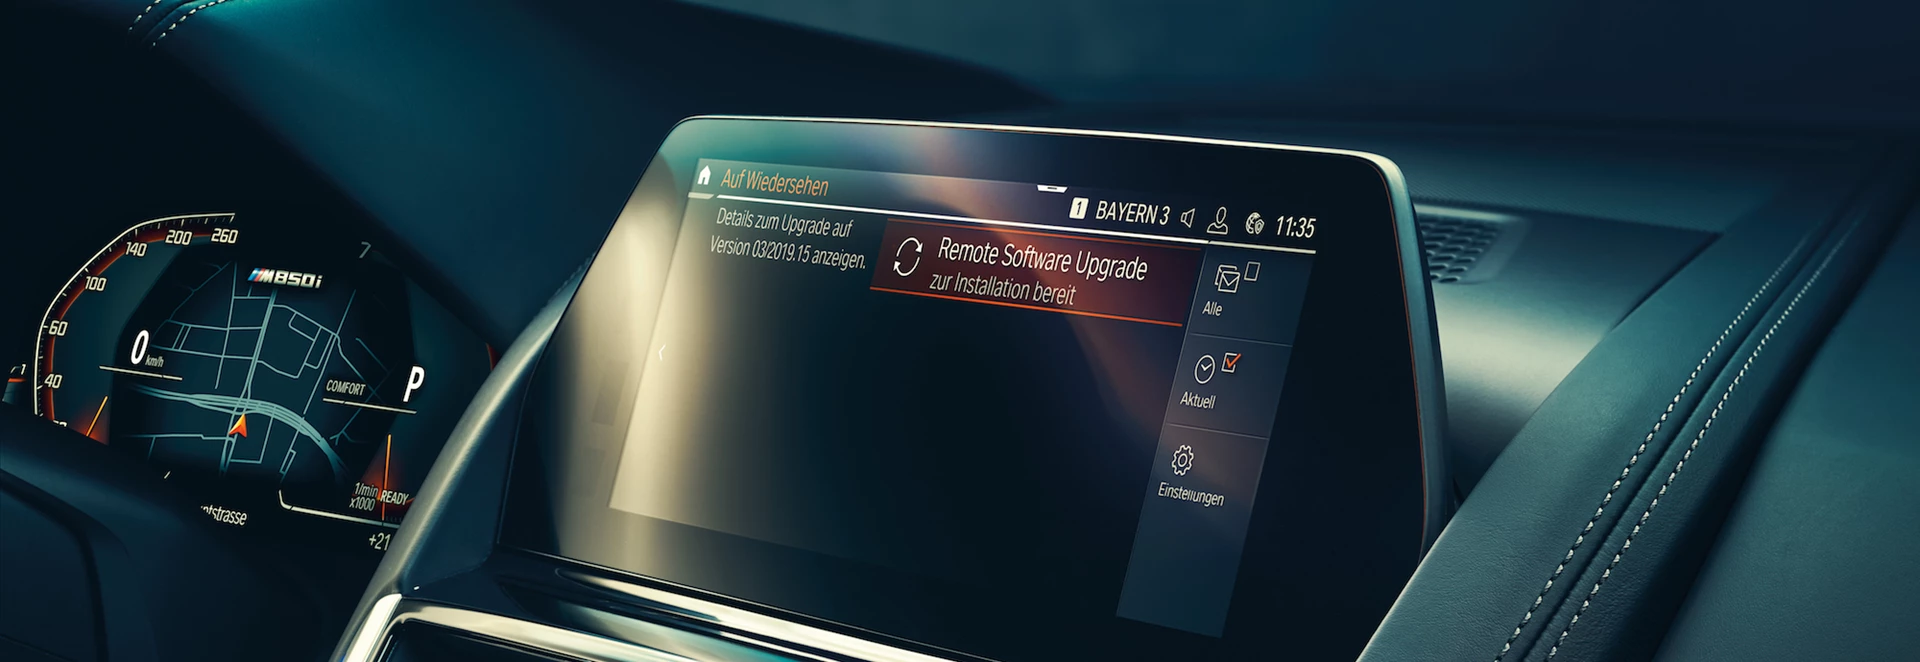 This is BMW's new Intelligent Personal Assistant coming in 2019